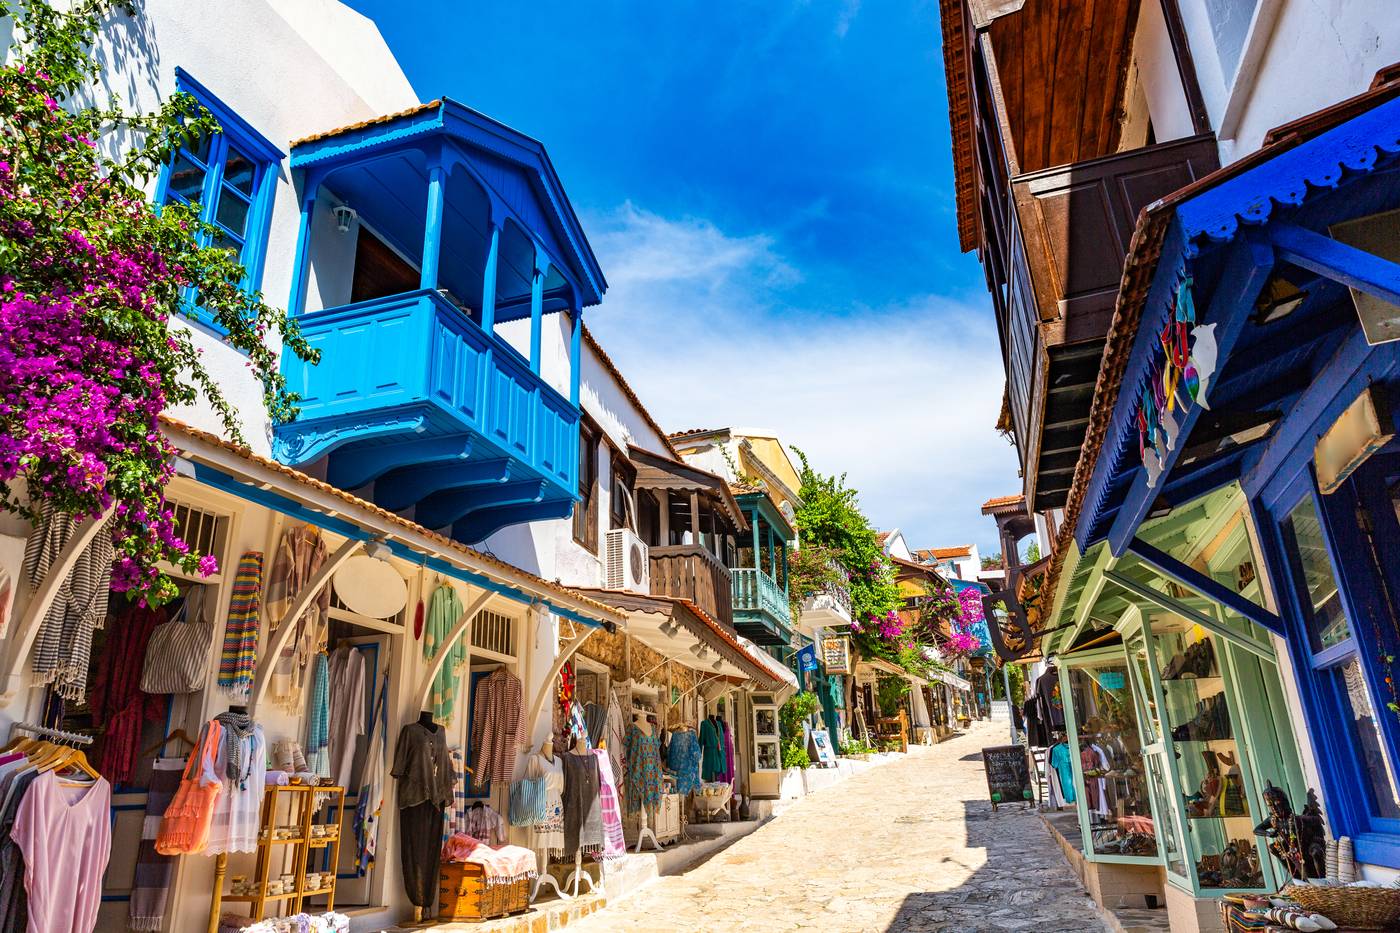 Colourful shops in Antalya Old Town.